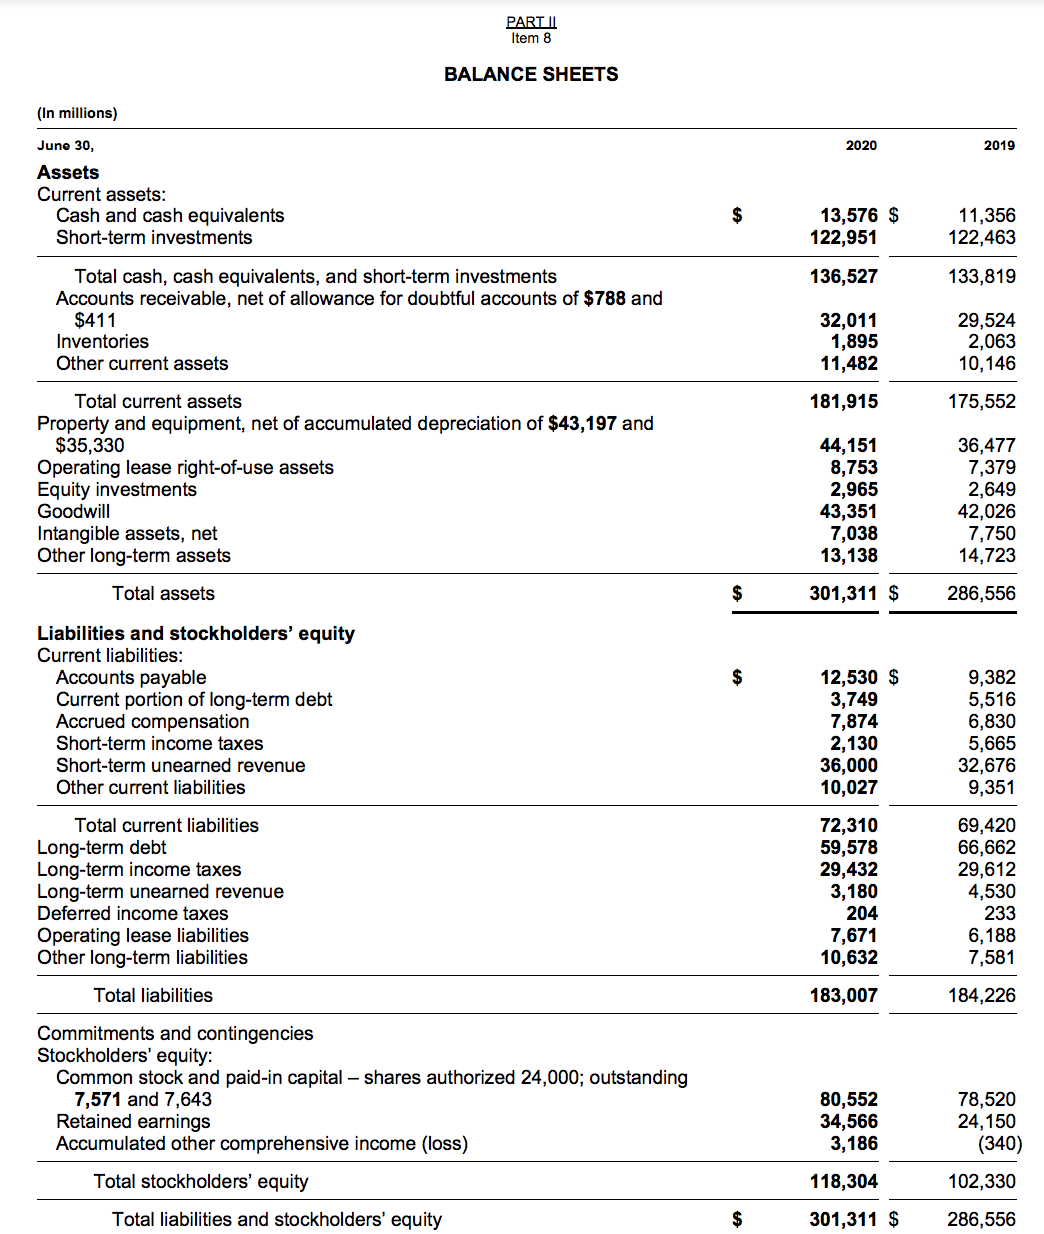 PART II
Item 8
BALANCE SHEETS
(In millions)
June 30,
2020
2019
Assets
Current assets:
Cash and cash equivalents
$
13,576 $
122,951
11,356
122,463
Short-term investments
136,527
Total cash, cash equivalents, and short-term investments
Accounts receivable, net of allowance for doubtful accounts of $788 and
$411
Inventories
133,819
32,011
1,895
11,482
29,524
2,063
10,146
Other current assets
Total current assets
181,915
175,552
Property and equipment, net of accumulated depreciation of $43,197 and
$35,330
Operating lease right-of-use assets
Equity investments
Goodwill
44,151
8,753
2,965
43,351
7,038
13,138
36,477
7,379
2,649
42,026
7,750
14,723
Intangible assets, net
Other long-term assets
Total assets
$
301,311 $
286,556
Liabilities and stockholders' equity
Current liabilities:
Accounts payable
Current portion of long-term debt
Accrued compensation
$
12,530 $
3,749
7,874
2,130
36,000
10,027
9,382
5,516
6,830
5,665
32,676
9,351
Short-term income taxes
Short-term unearned revenue
Other current liabilities
72,310
59,578
29,432
3,180
204
7,671
10,632
69,420
66,662
29,612
4,530
233
6,188
7,581
Total current liabilities
Long-term debt
Long-term income taxes
Long-term unearned revenue
Deferred income taxes
Operating lease liabilities
Other long-term liabilities
Total liabilities
183,007
184,226
Commitments and contingencies
Stockholders' equity:
Common stock and paid-in capital – shares authorized 24,000; outstanding
7,571 and 7,643
Retained earnings
Accumulated other comprehensive income (loss)
80,552
34,566
3,186
78,520
24,150
(340)
Total stockholders' equity
118,304
102,330
Total liabilities and stockholders' equity
$
301,311 $
286,556
